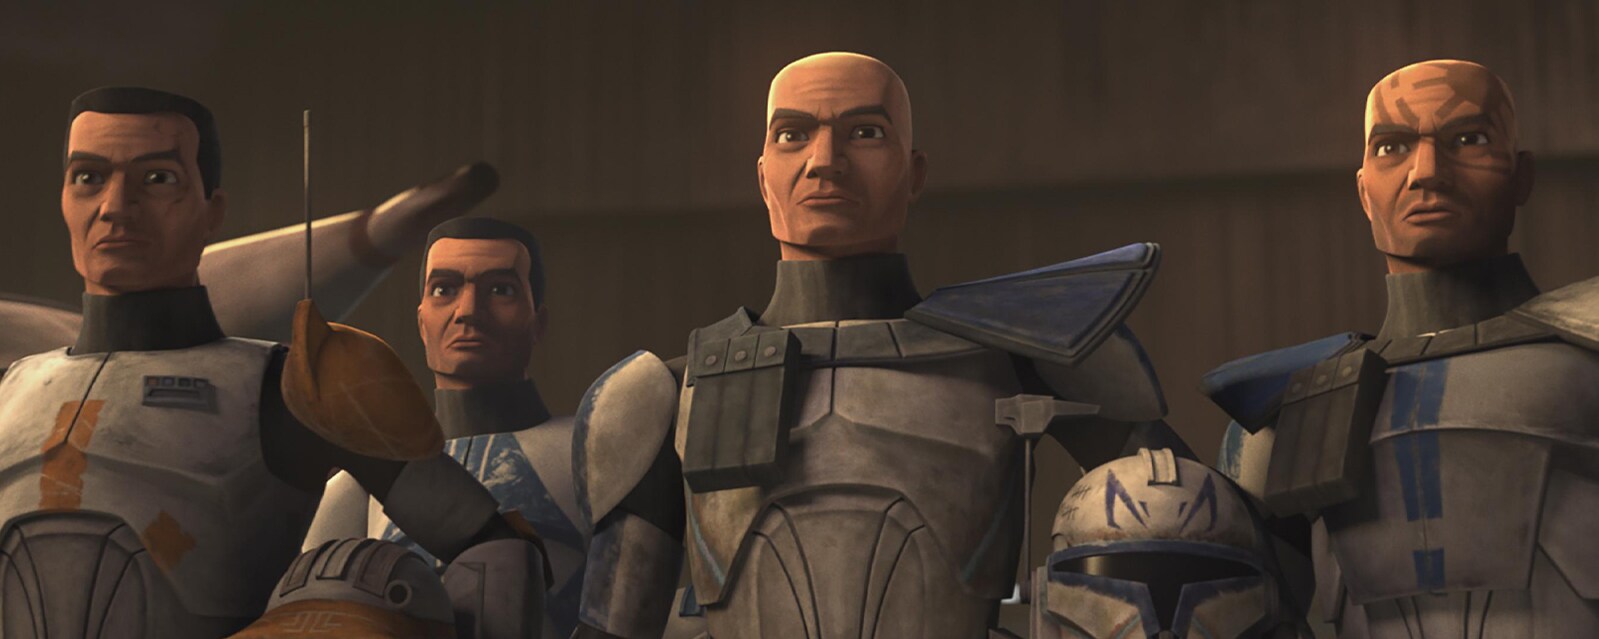 Clone Troopers in The Clone Wars series